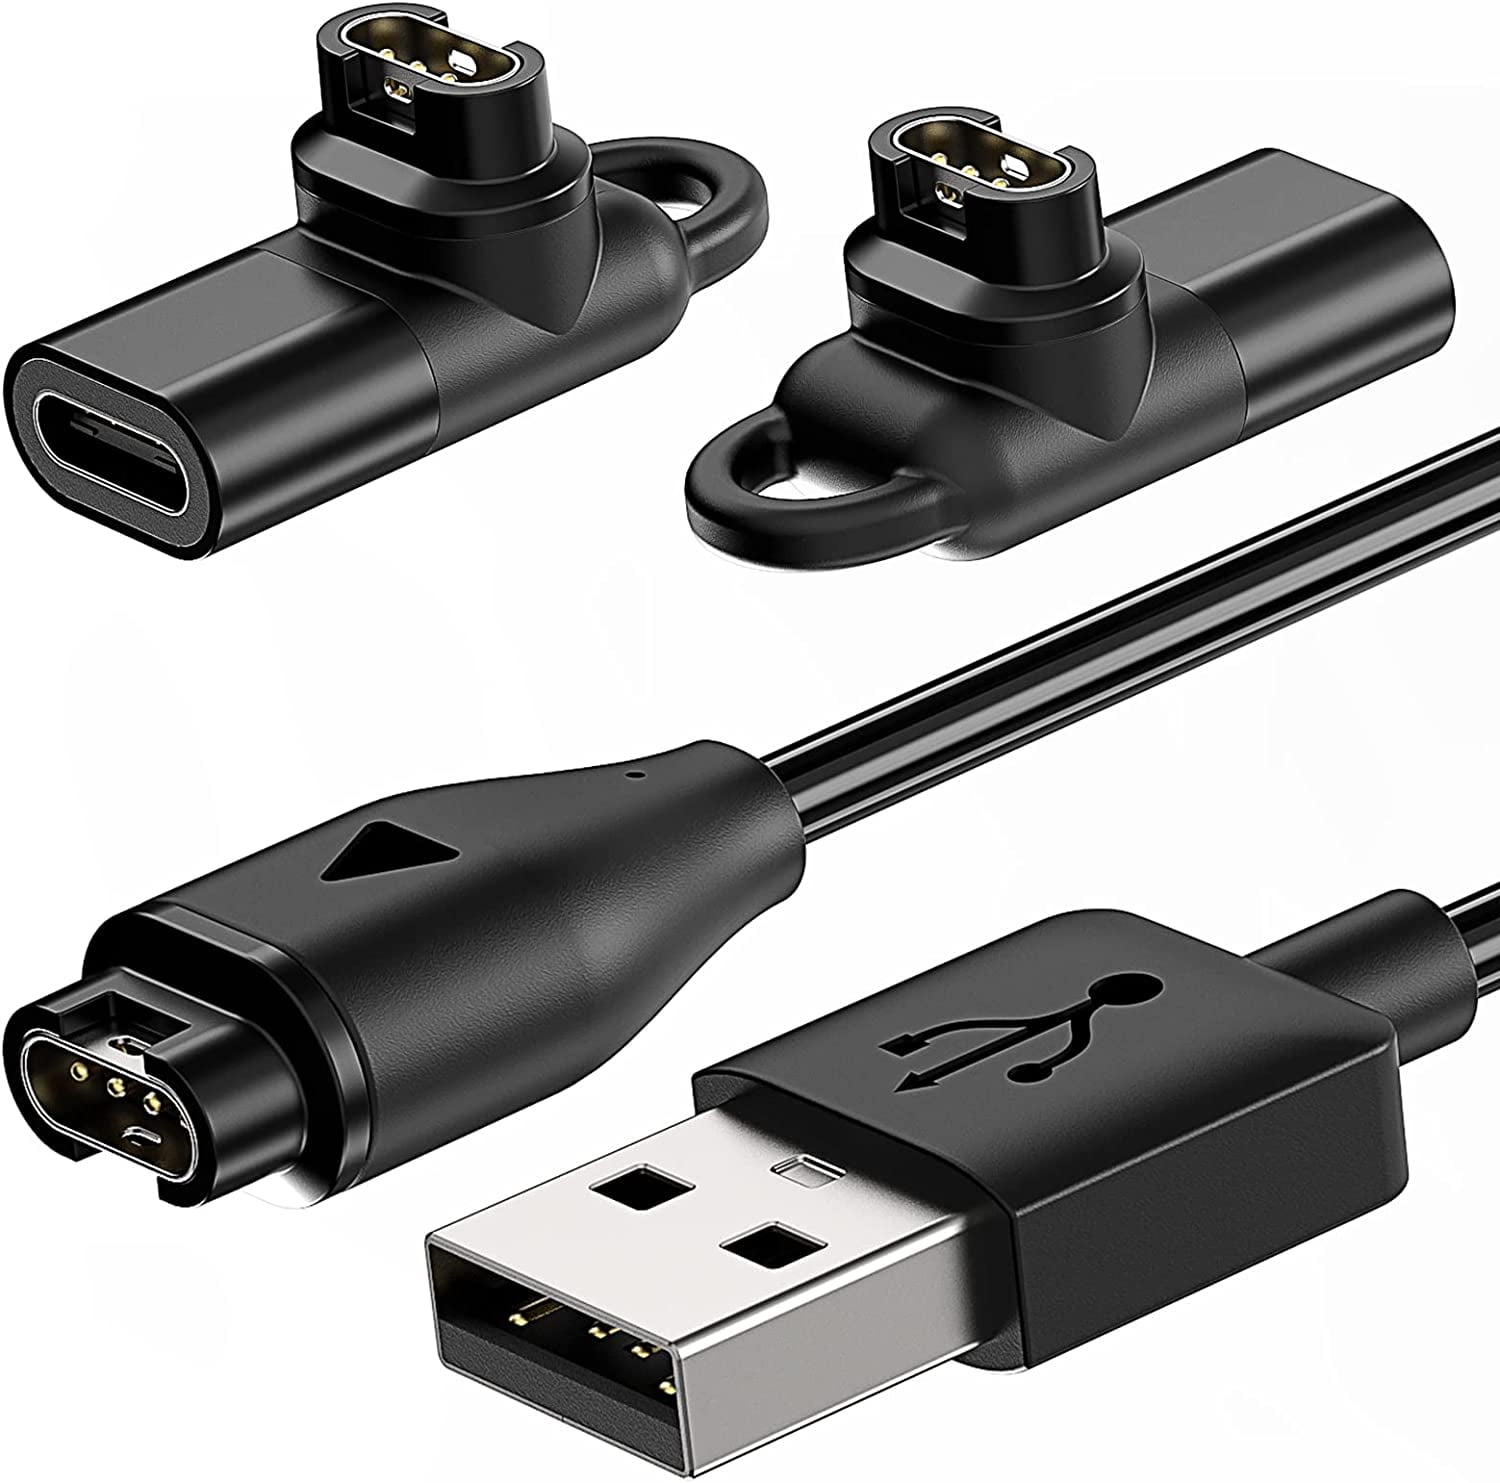 Charging Cable for Watch with 2 USB C Charger Adapter Connector, 3.3FT Charger for Garmin Fenix - Walmart.com